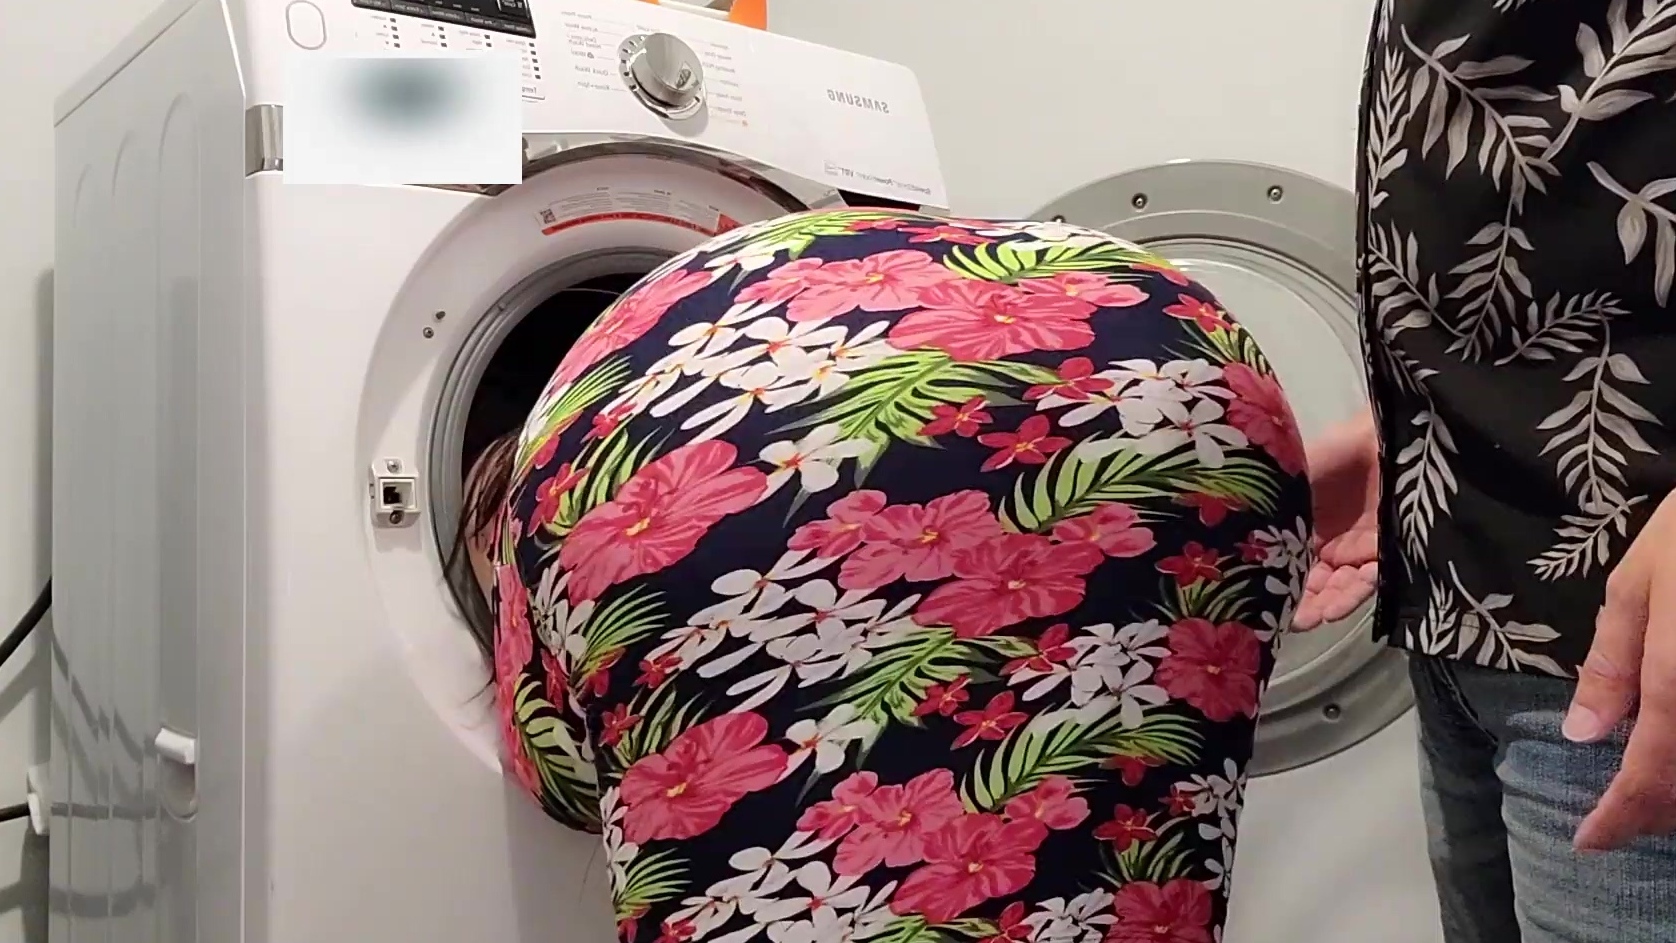 Bitch with huge Ass stuck in washing machine! Perv stepson sprayed cum all over her pic pic